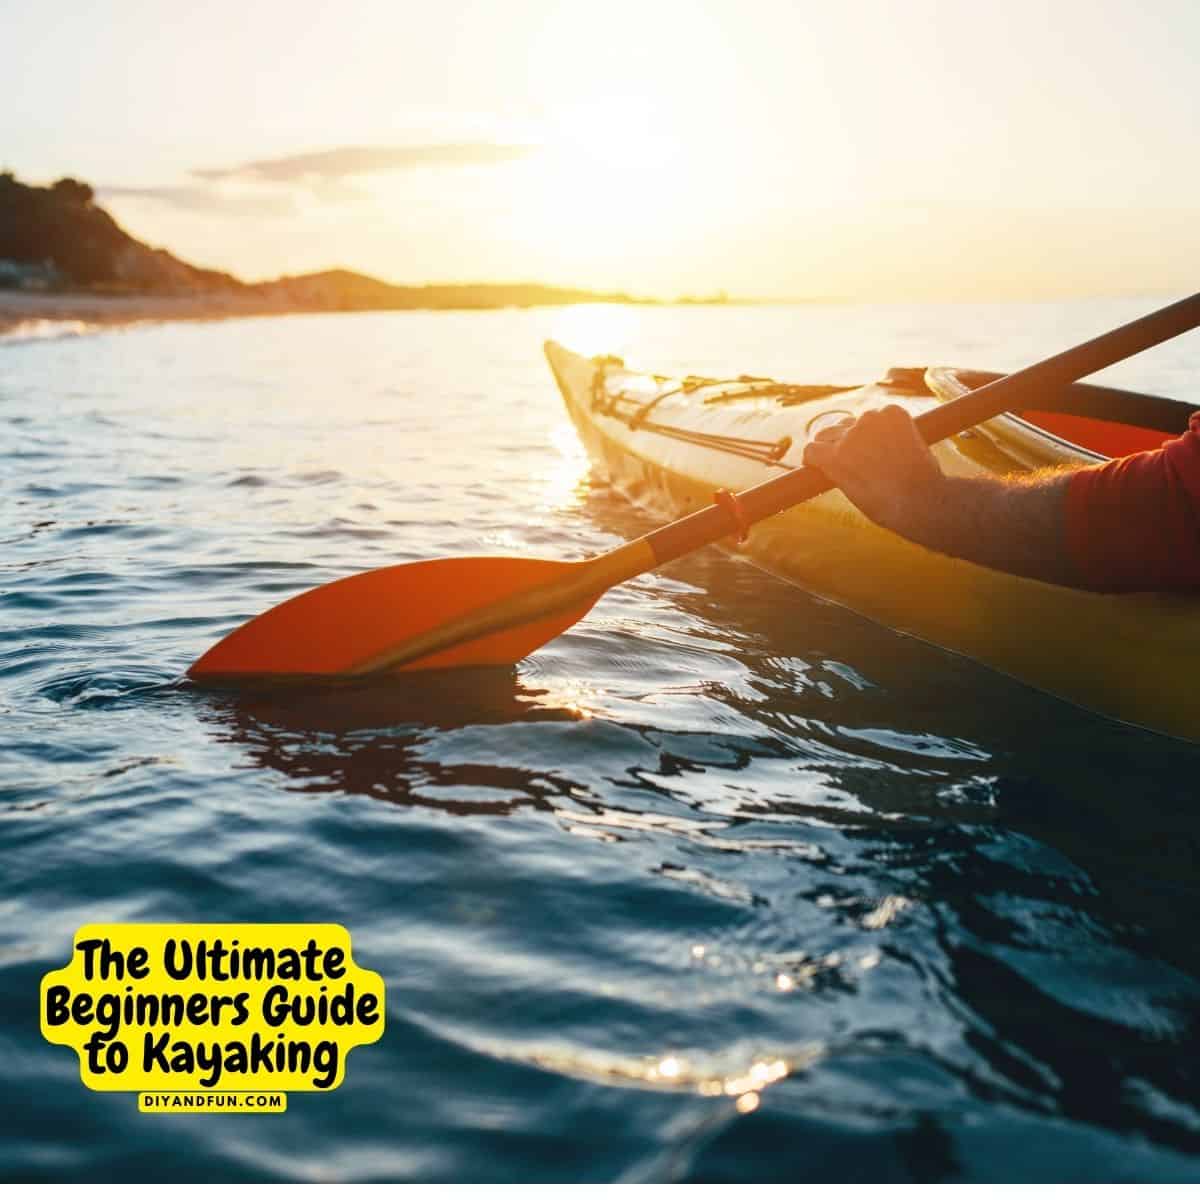 The Ultimate Beginners Guide to Kayaking, includes the basics about kayaking, getting started, and who kayaking may not be best for.